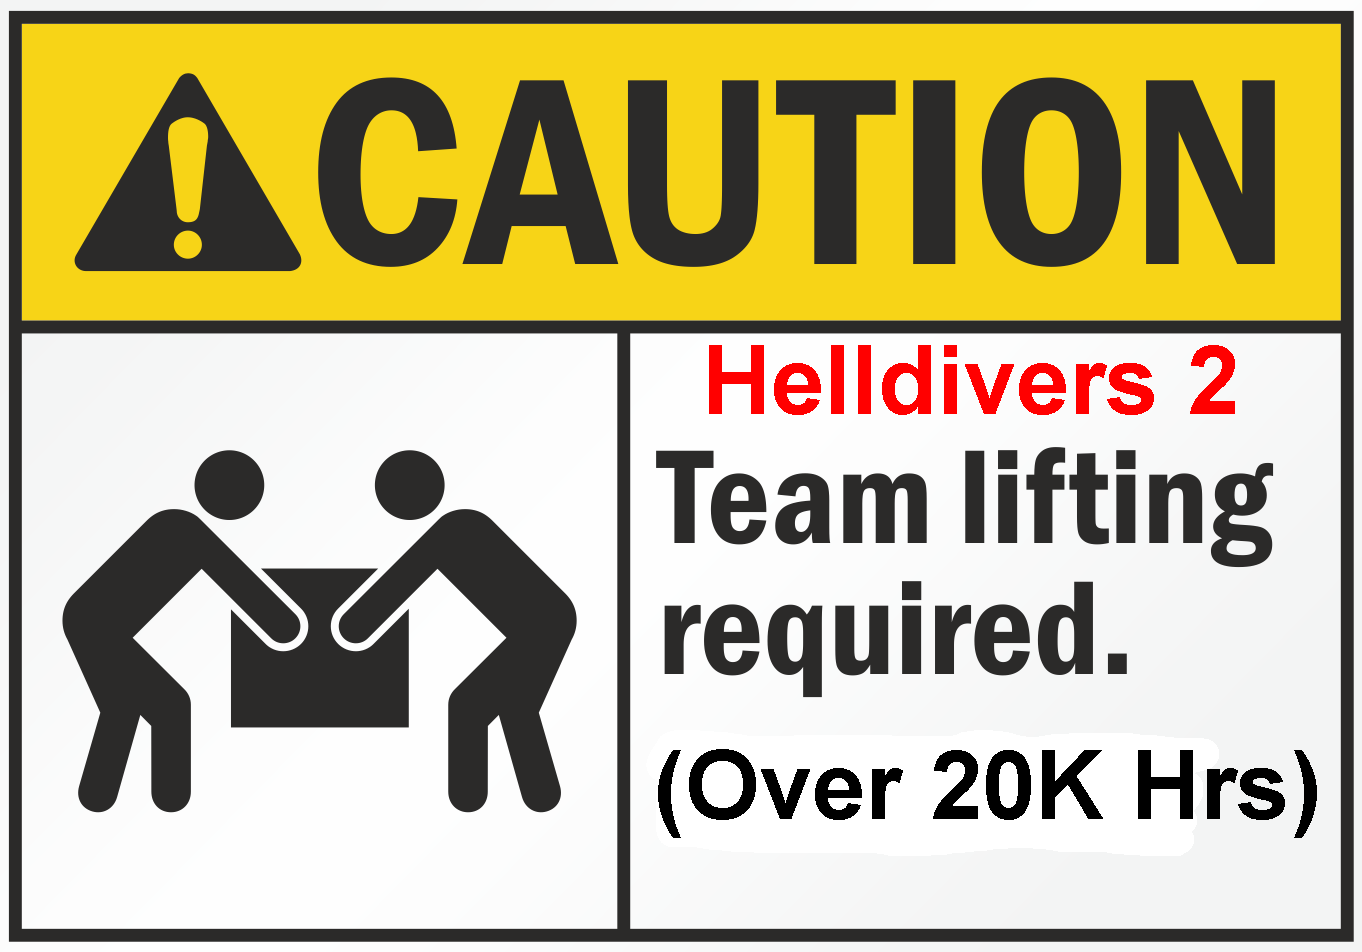 Helldivers 2 Community Event. There's 1000 people who own it and